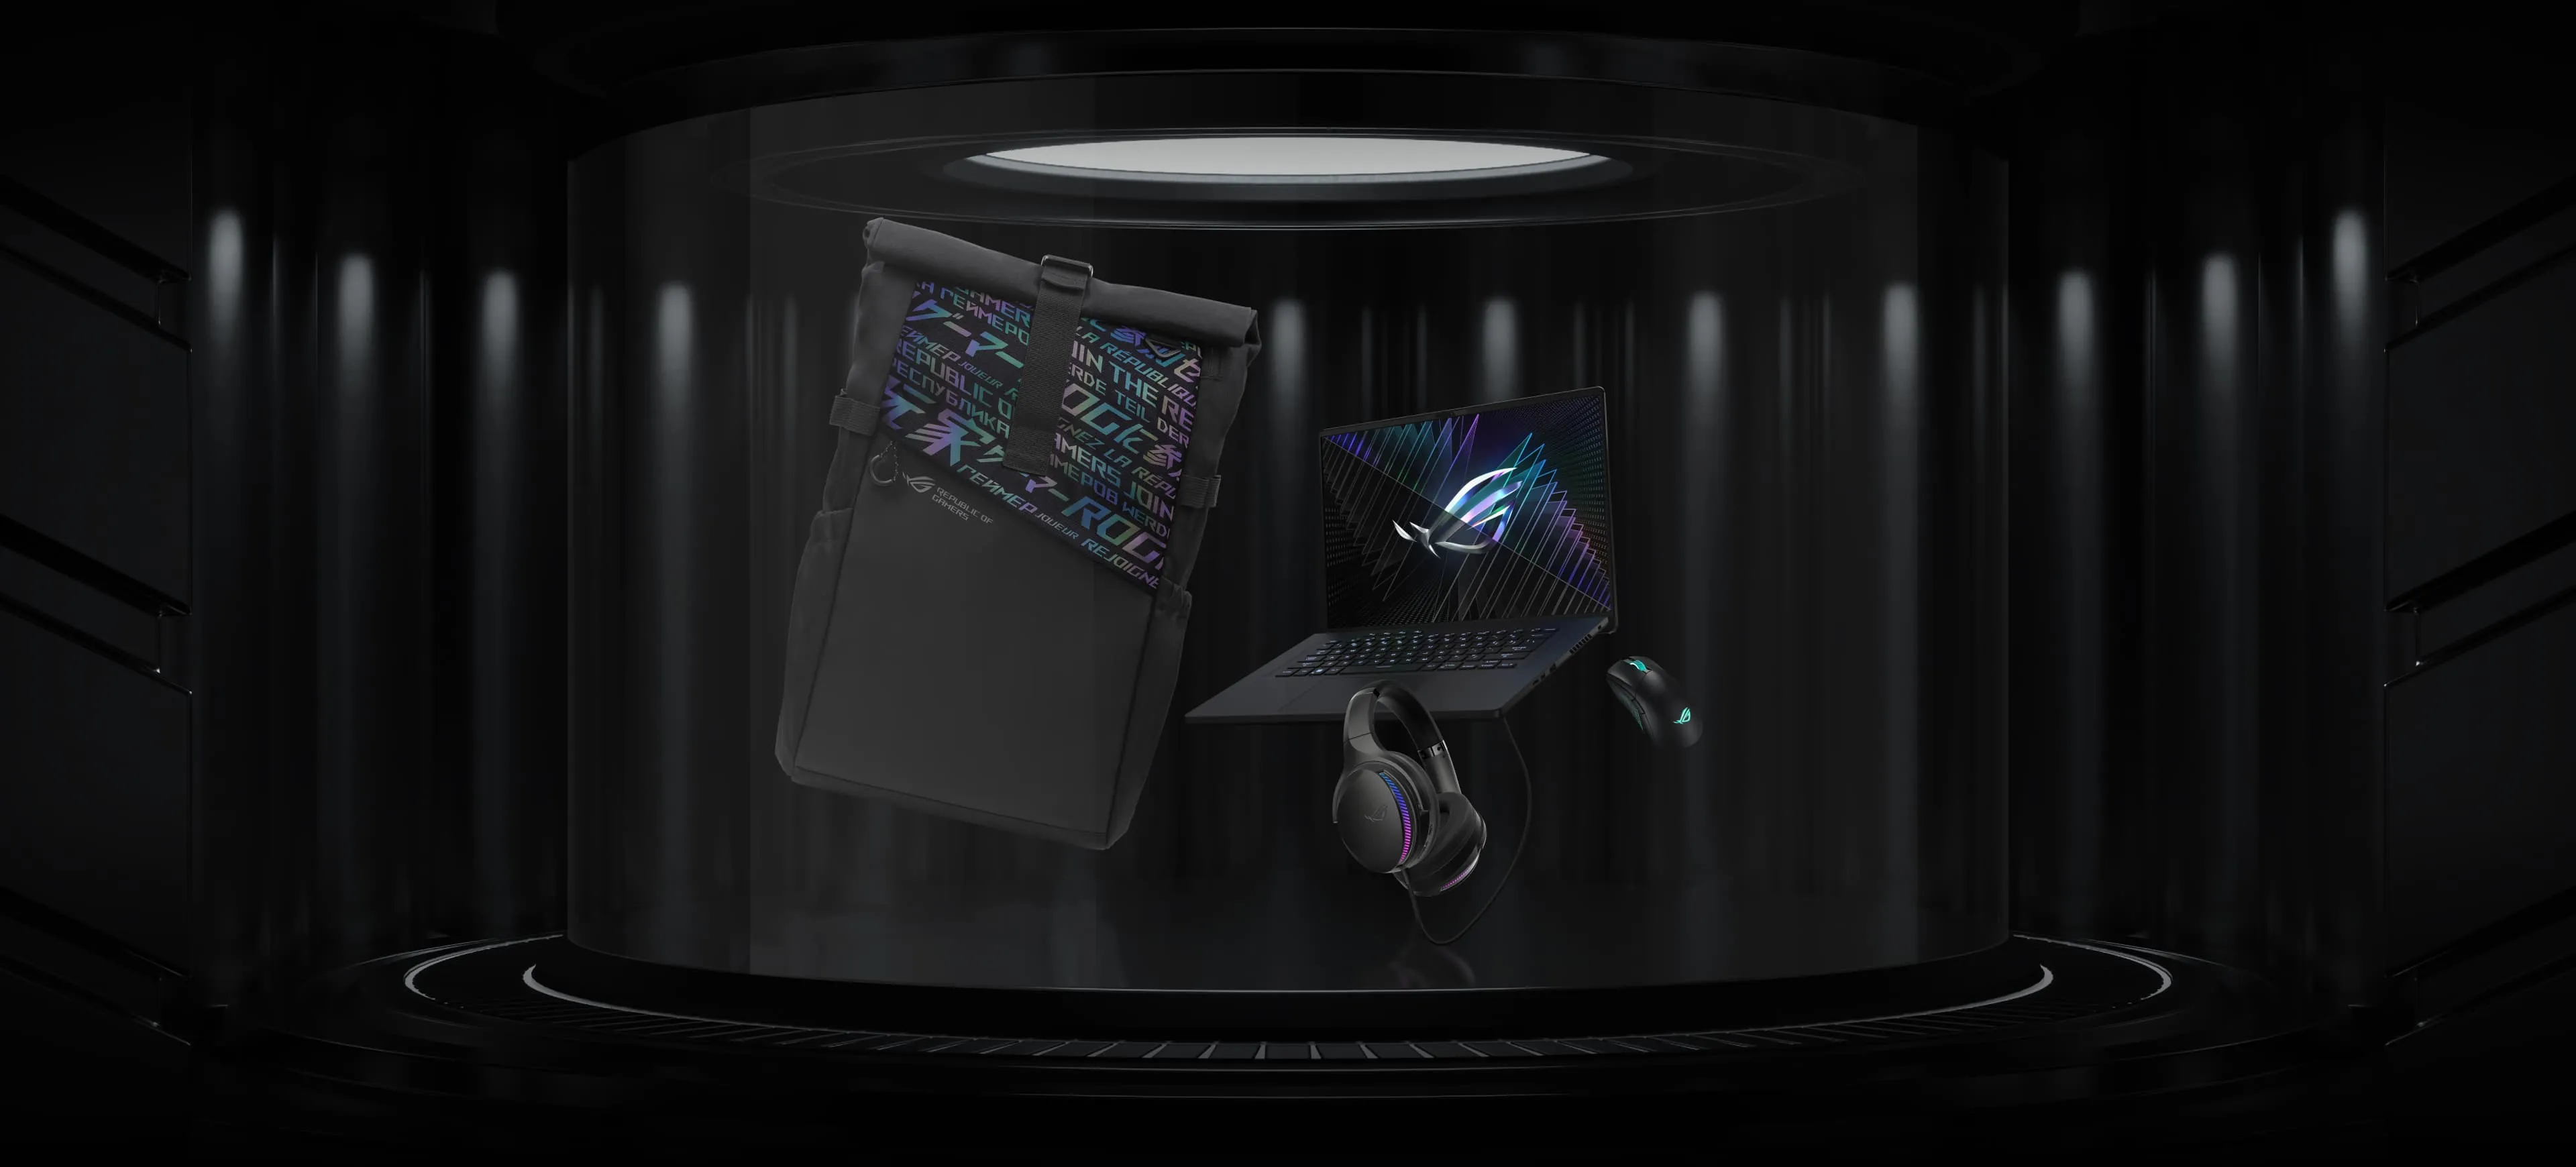 Image showing the M16, ROG Ranger backpack, Gladius III mouse, and ROG Fusion II 300 headset all together.